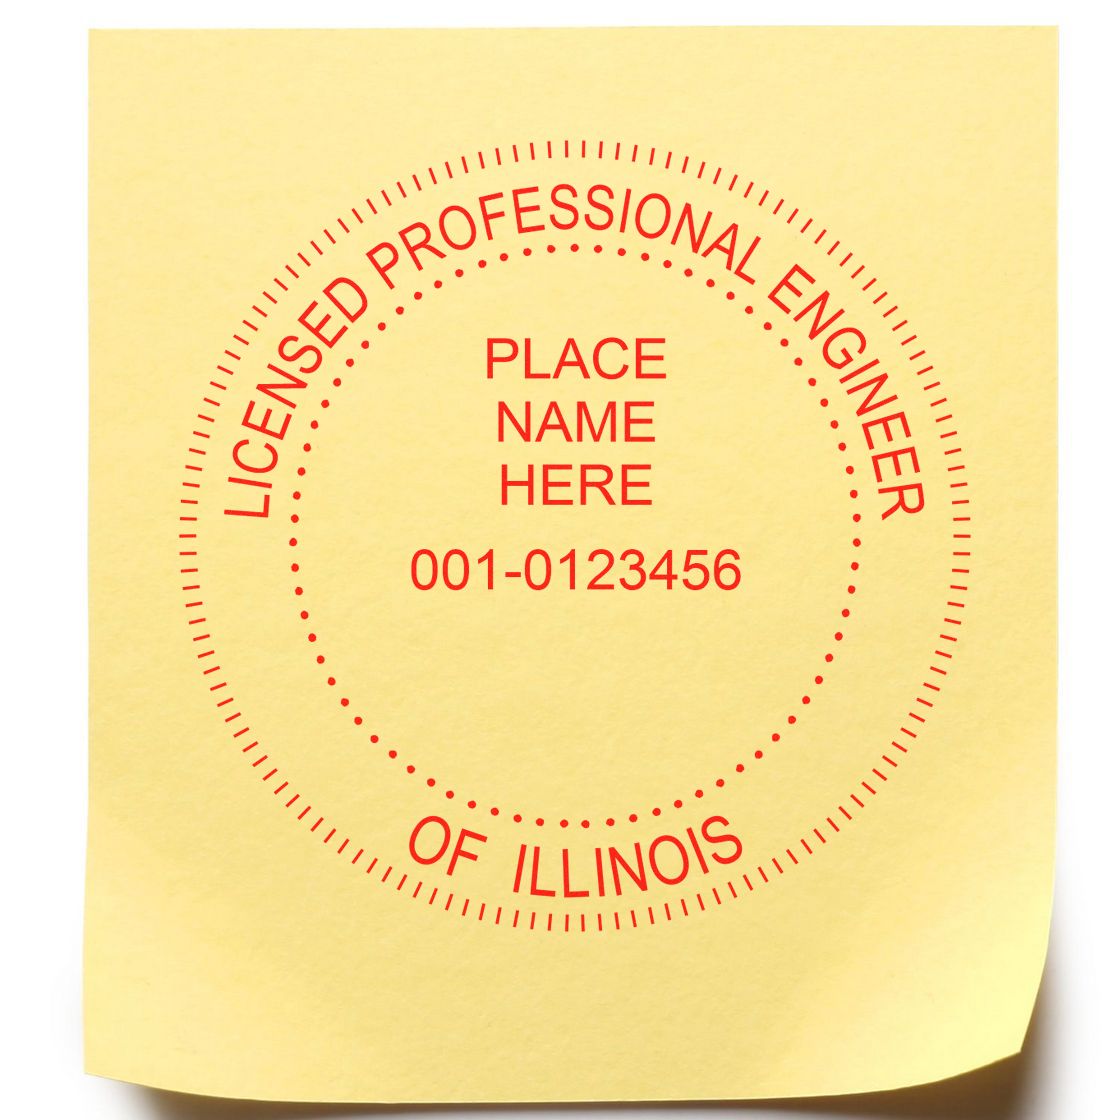 A photograph of the Premium MaxLight Pre-Inked Illinois Engineering Stamp stamp impression reveals a vivid, professional image of the on paper.